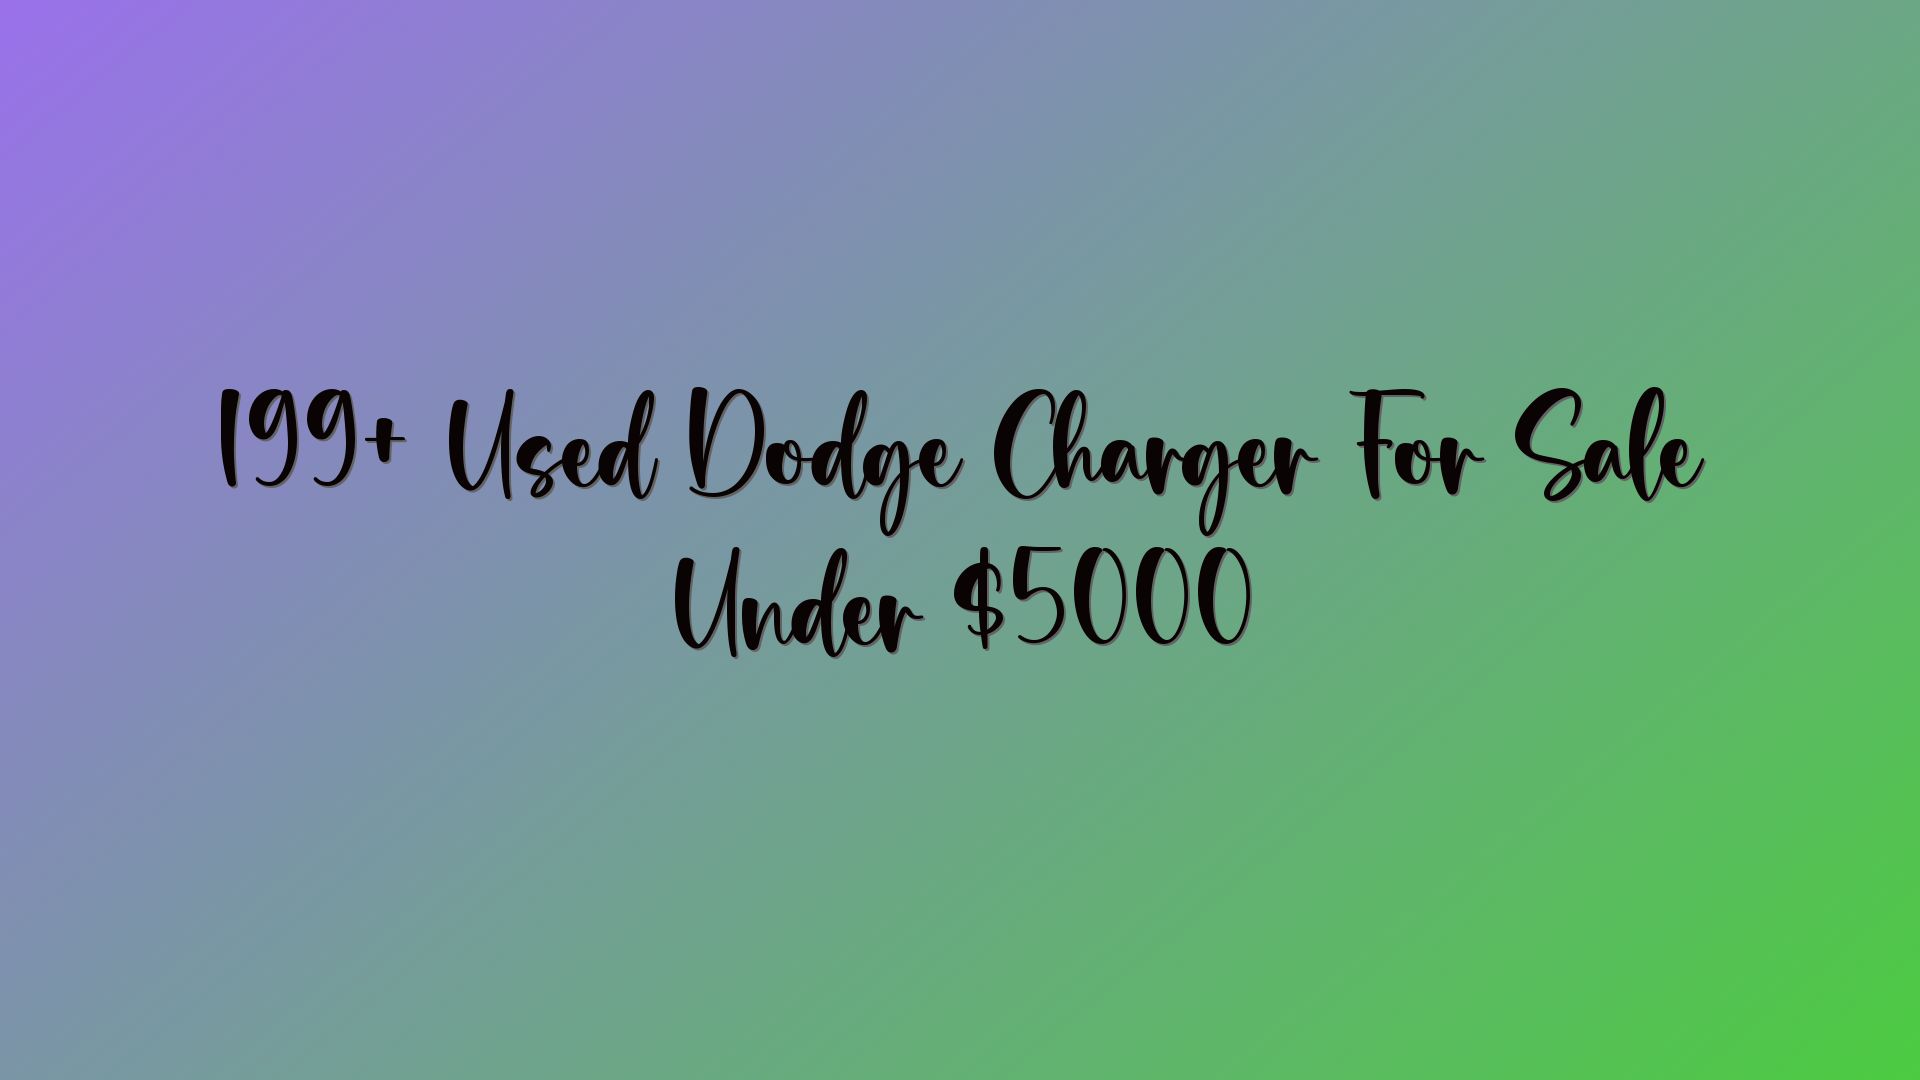 199+ Used Dodge Charger For Sale Under $5000